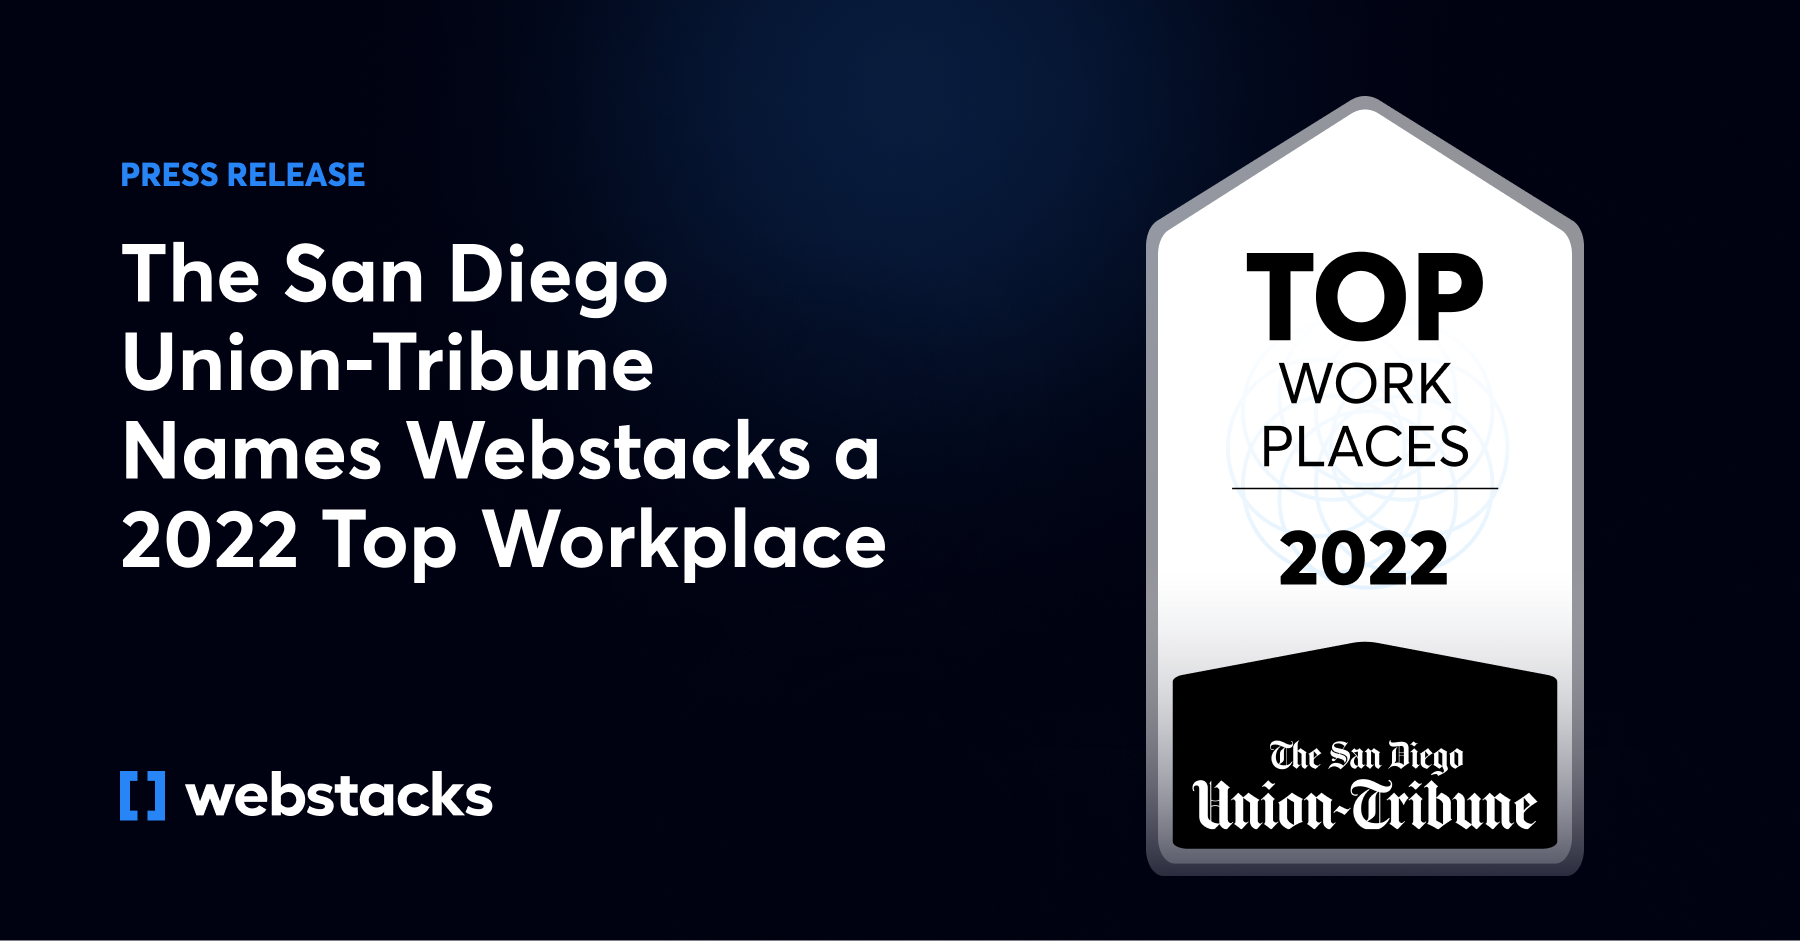 The San Diego Union-Tribune names Webstacks a 2022 top workplace.